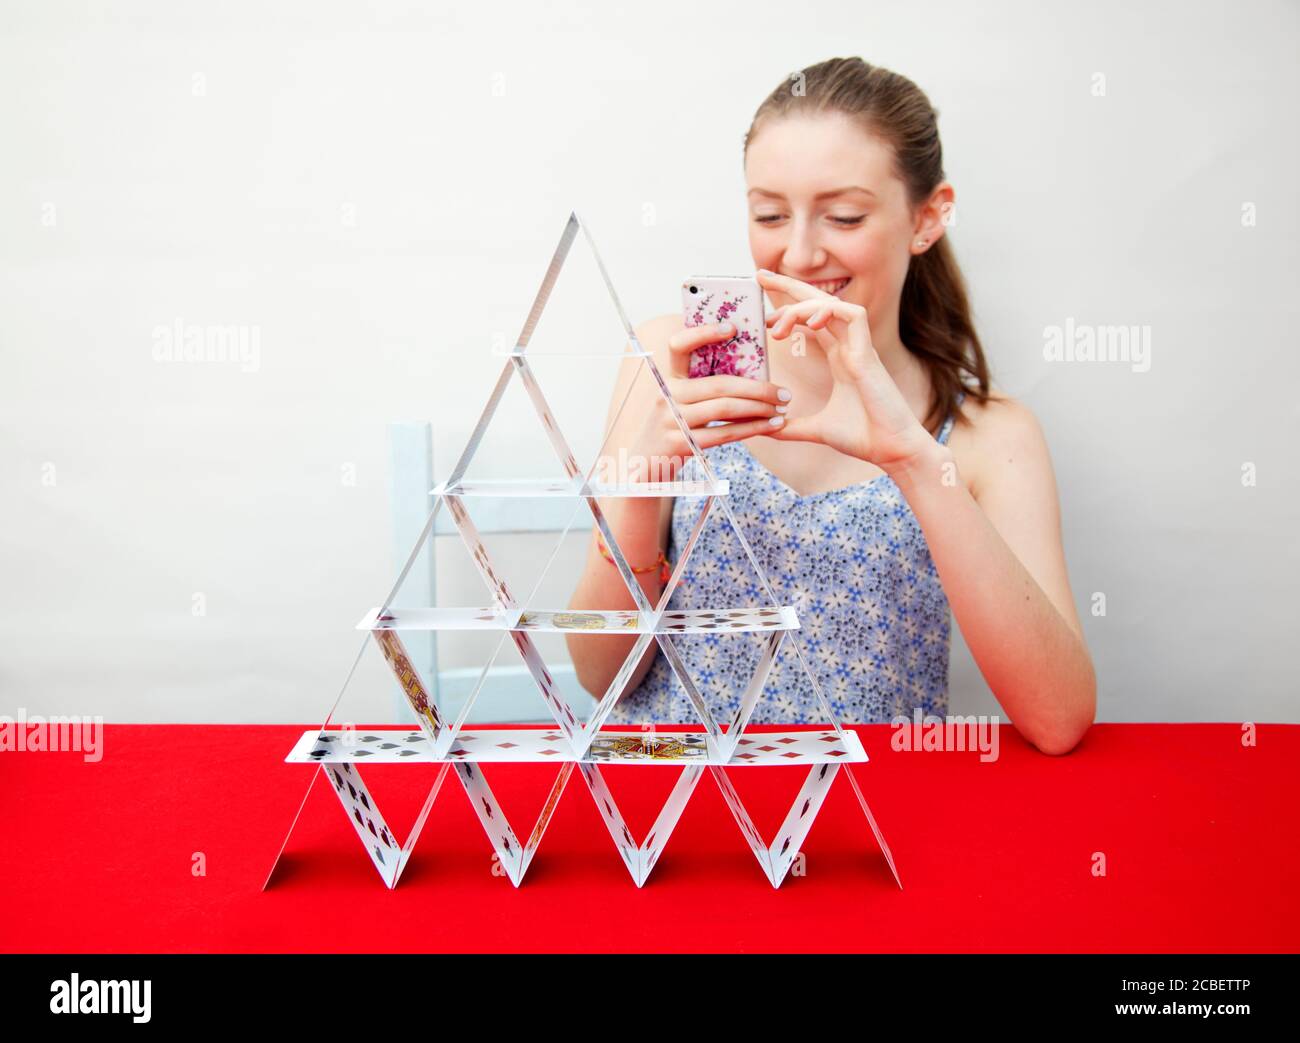 A teenage girl photographing a house of cards she has built Stock Photo